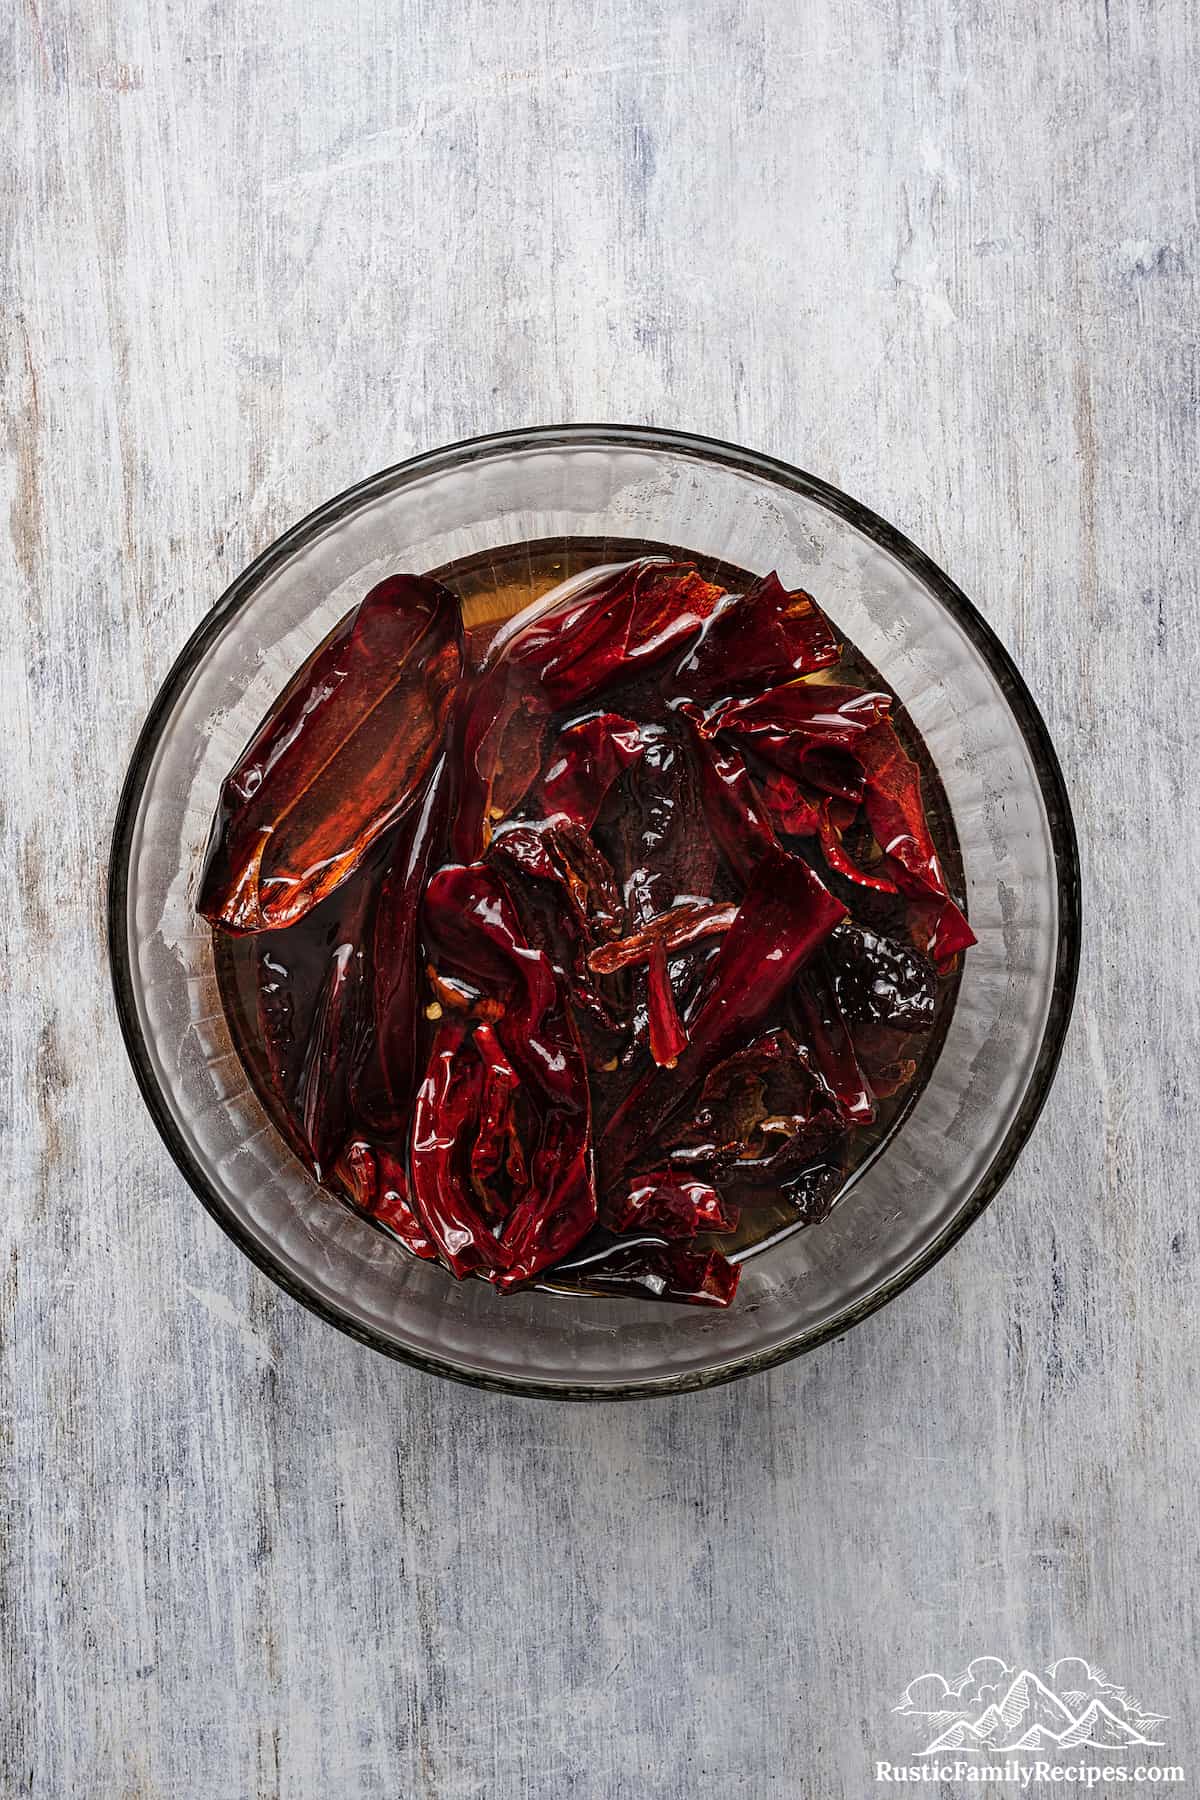 Hydrating the toasted chiles in boiling water.